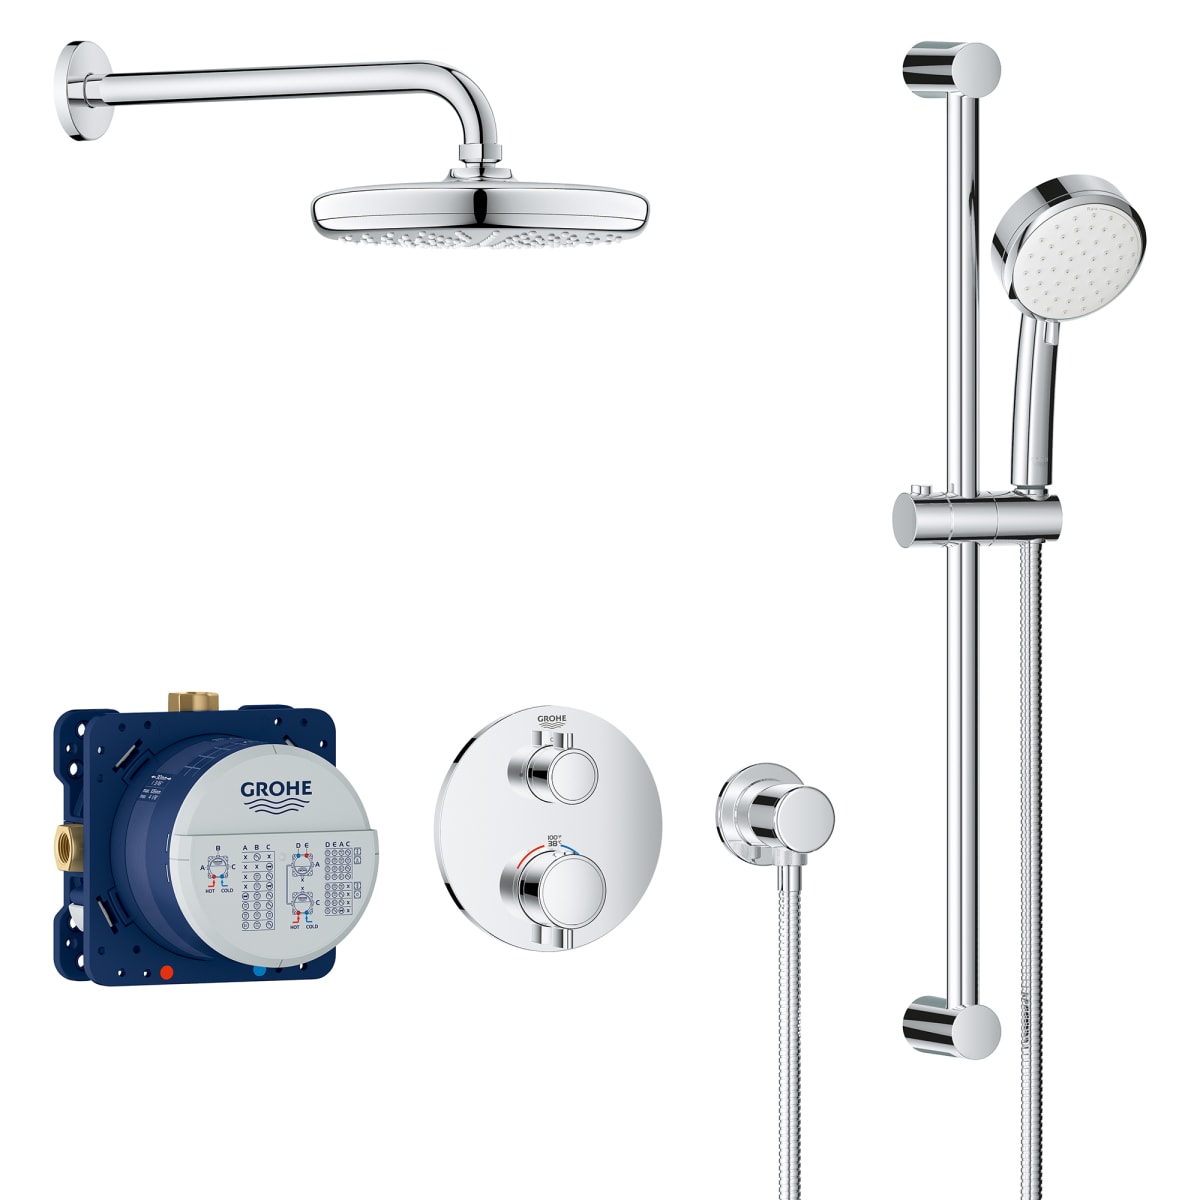 Grohe 34745000 Grohtherm Thermostatic System with | Build.com